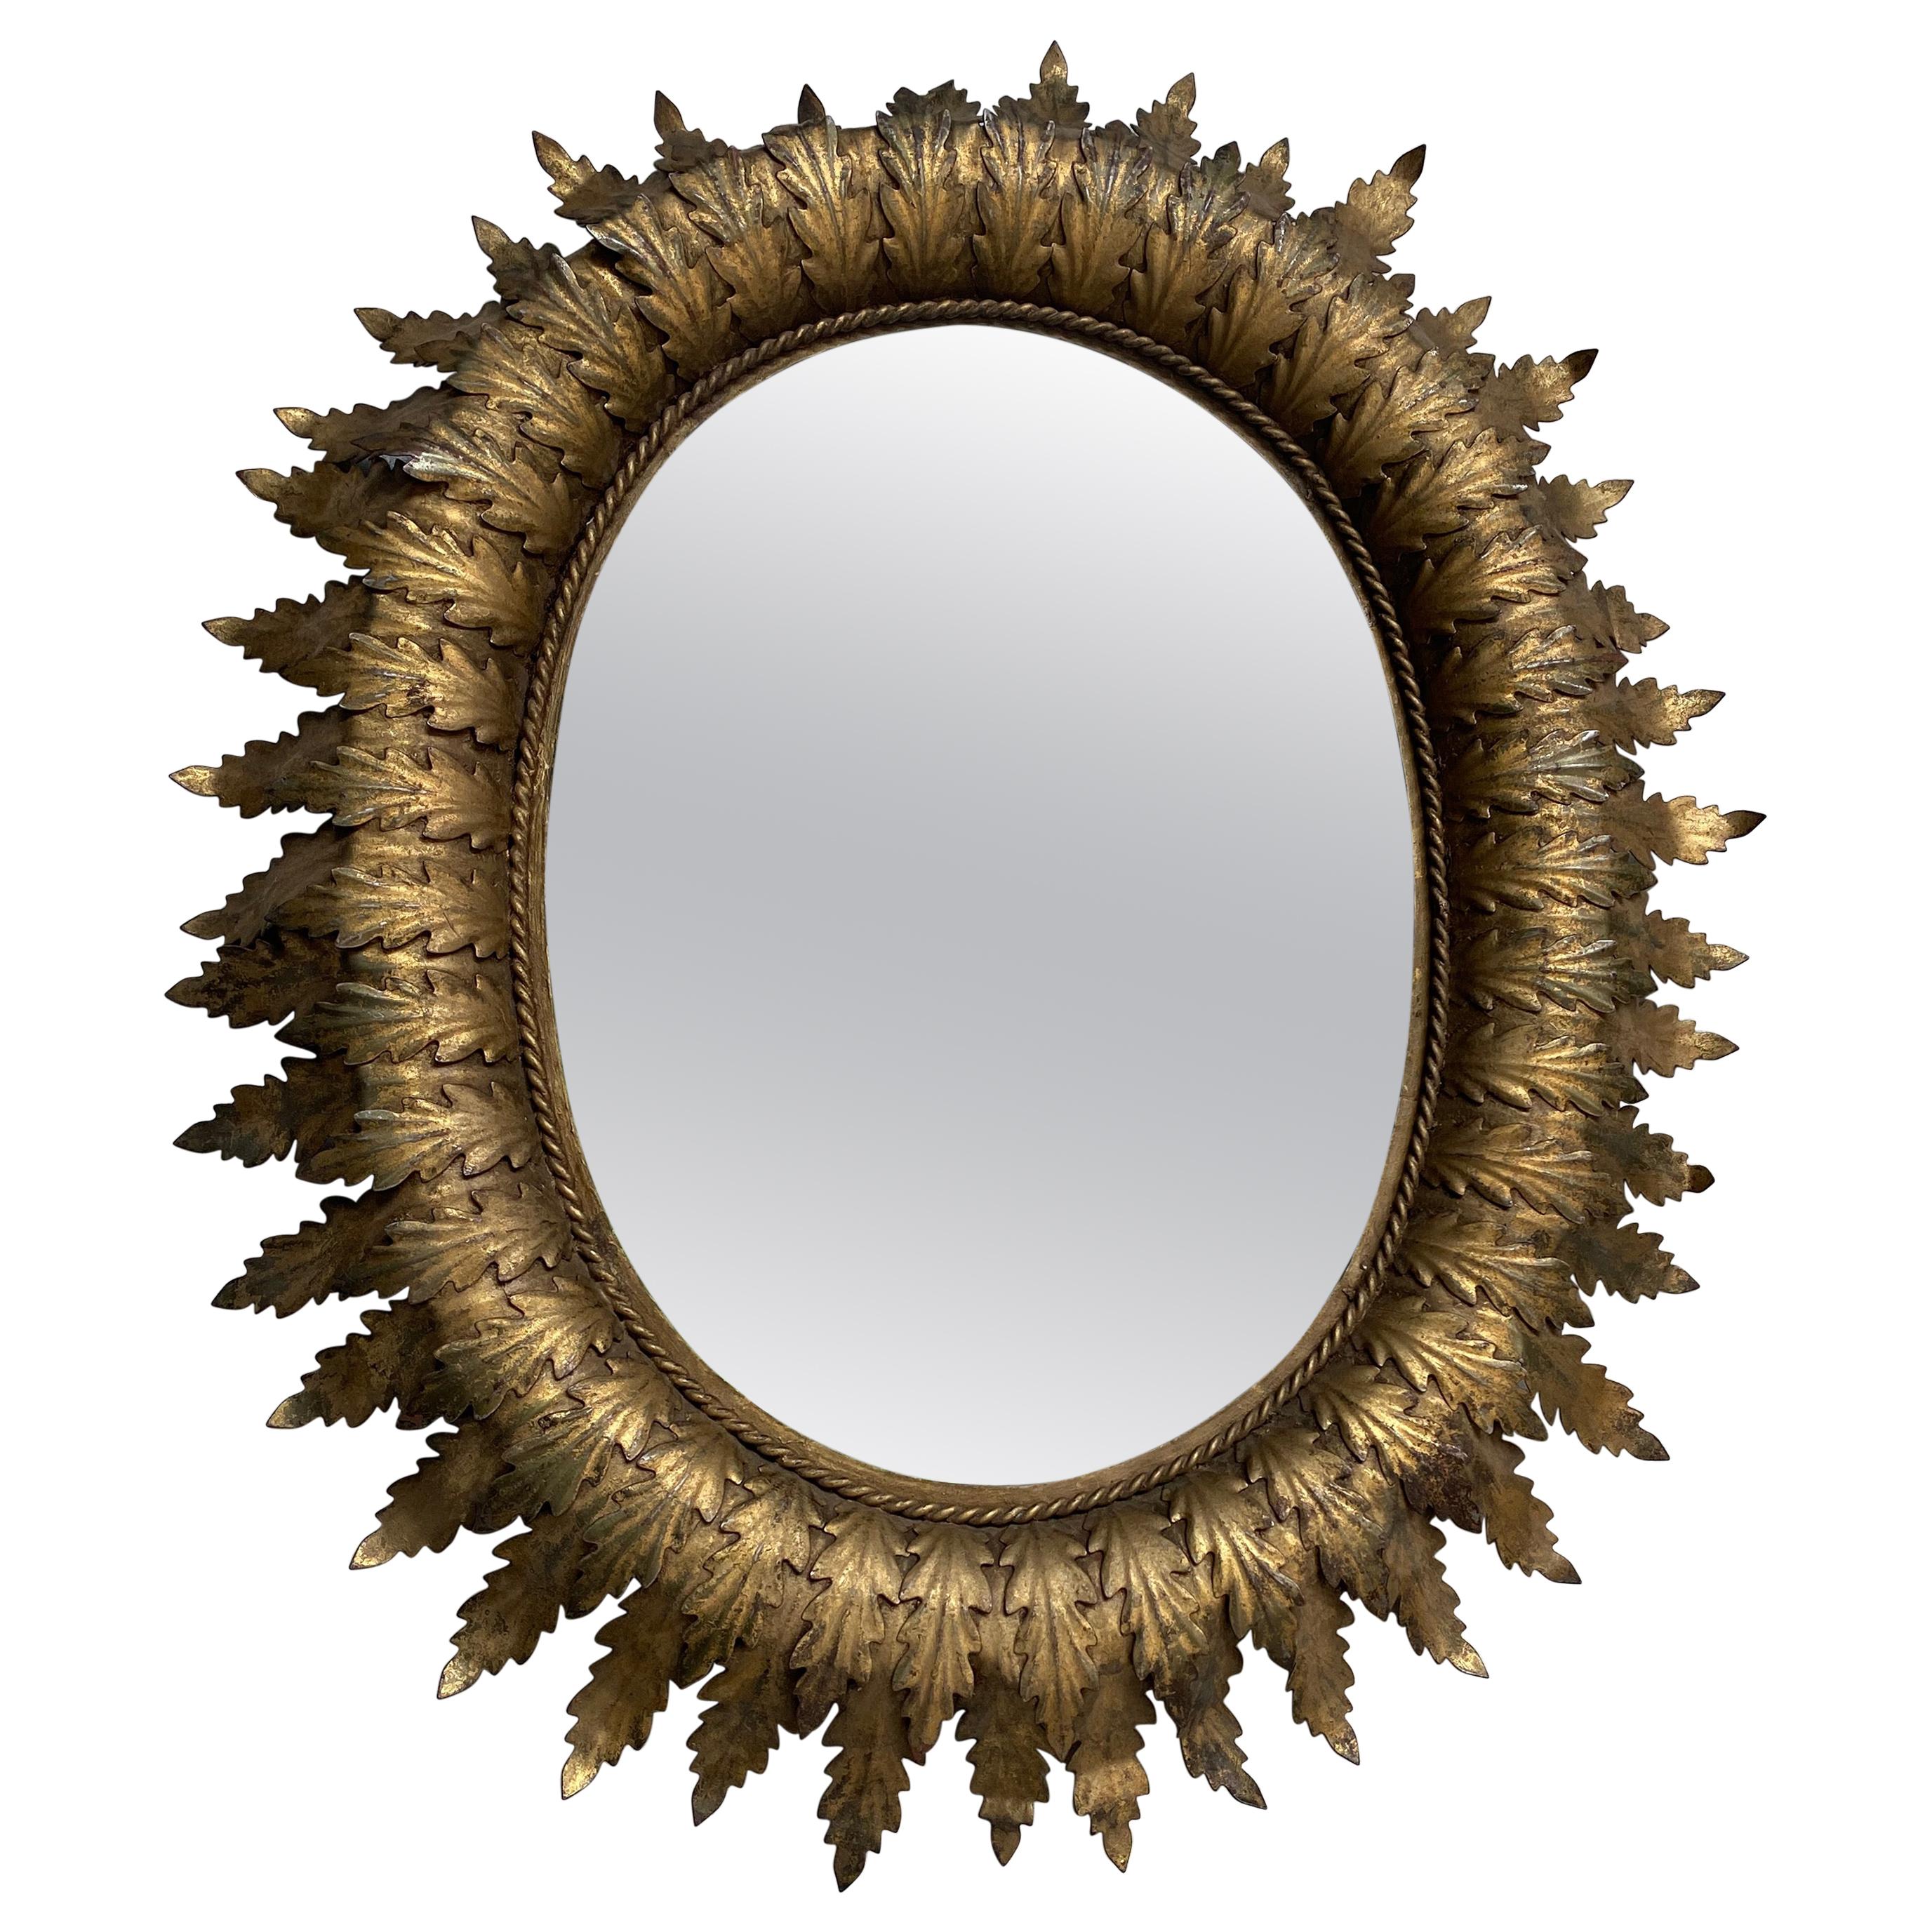 Spanish Oval Sunburst Mirror with Double Layered Leaves